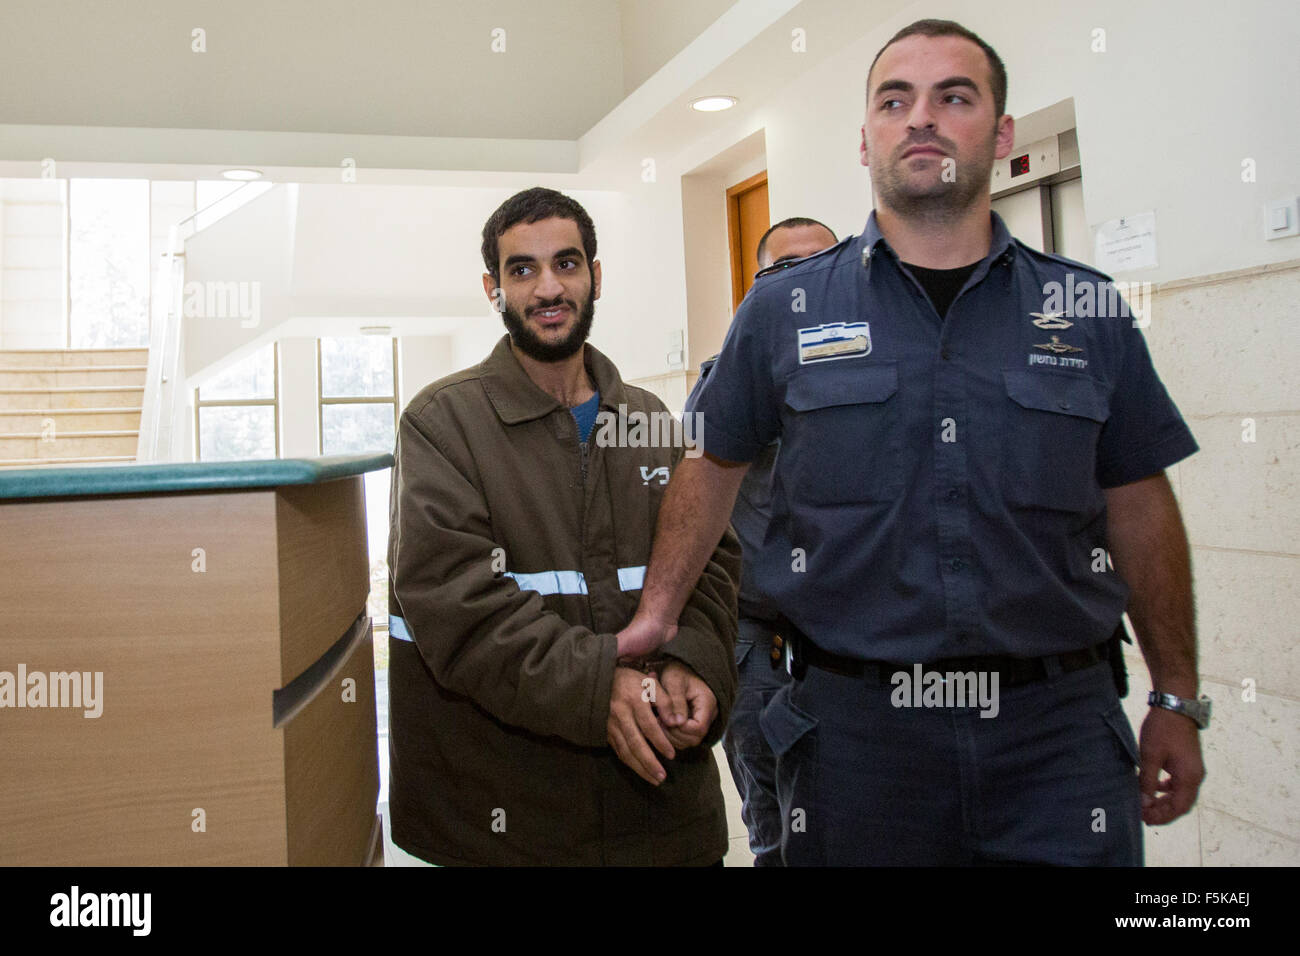 (151105) -- JERUSALEM, Nov. 5, 2015 (Xinhua) -- Abed al-Aziz Meri, 21, is escorted by Israeli prison officers at the District court in Jerusalem, on Nov. 5, 2015. Abed al-Aziz Meri was charged on Thursday morning with two counts of premeditated murder for instigating stabbing of Nehemia Lavi and Aharon Bennett in Jerusalem's Old City in last month. (Xinhua/JINI) Stock Photo